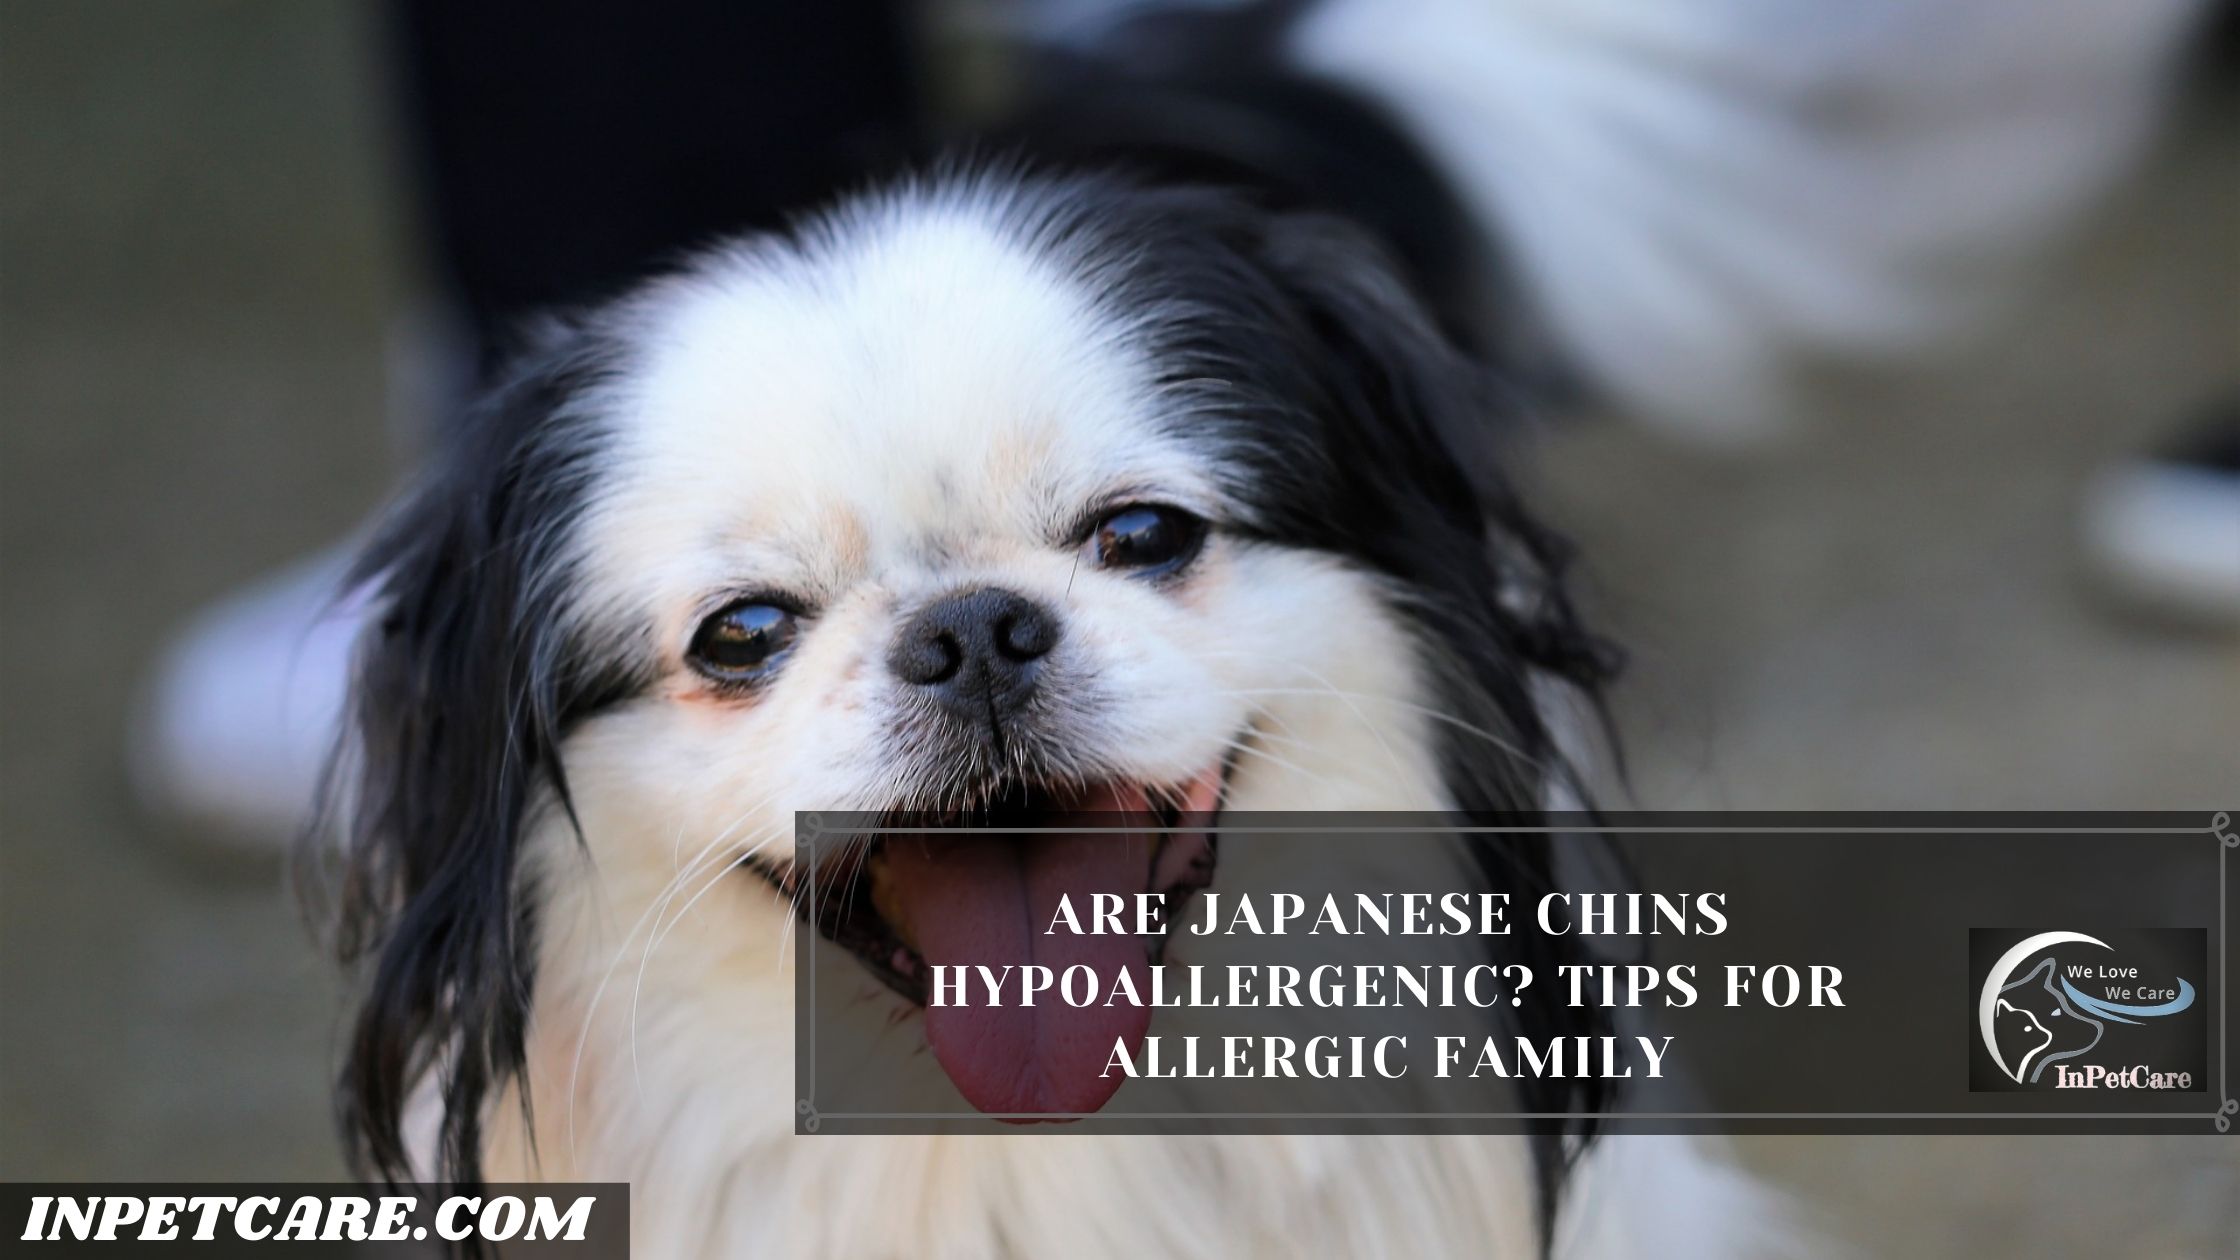 Are Japanese Chins Hypoallergenic? Tips For Allergic Family